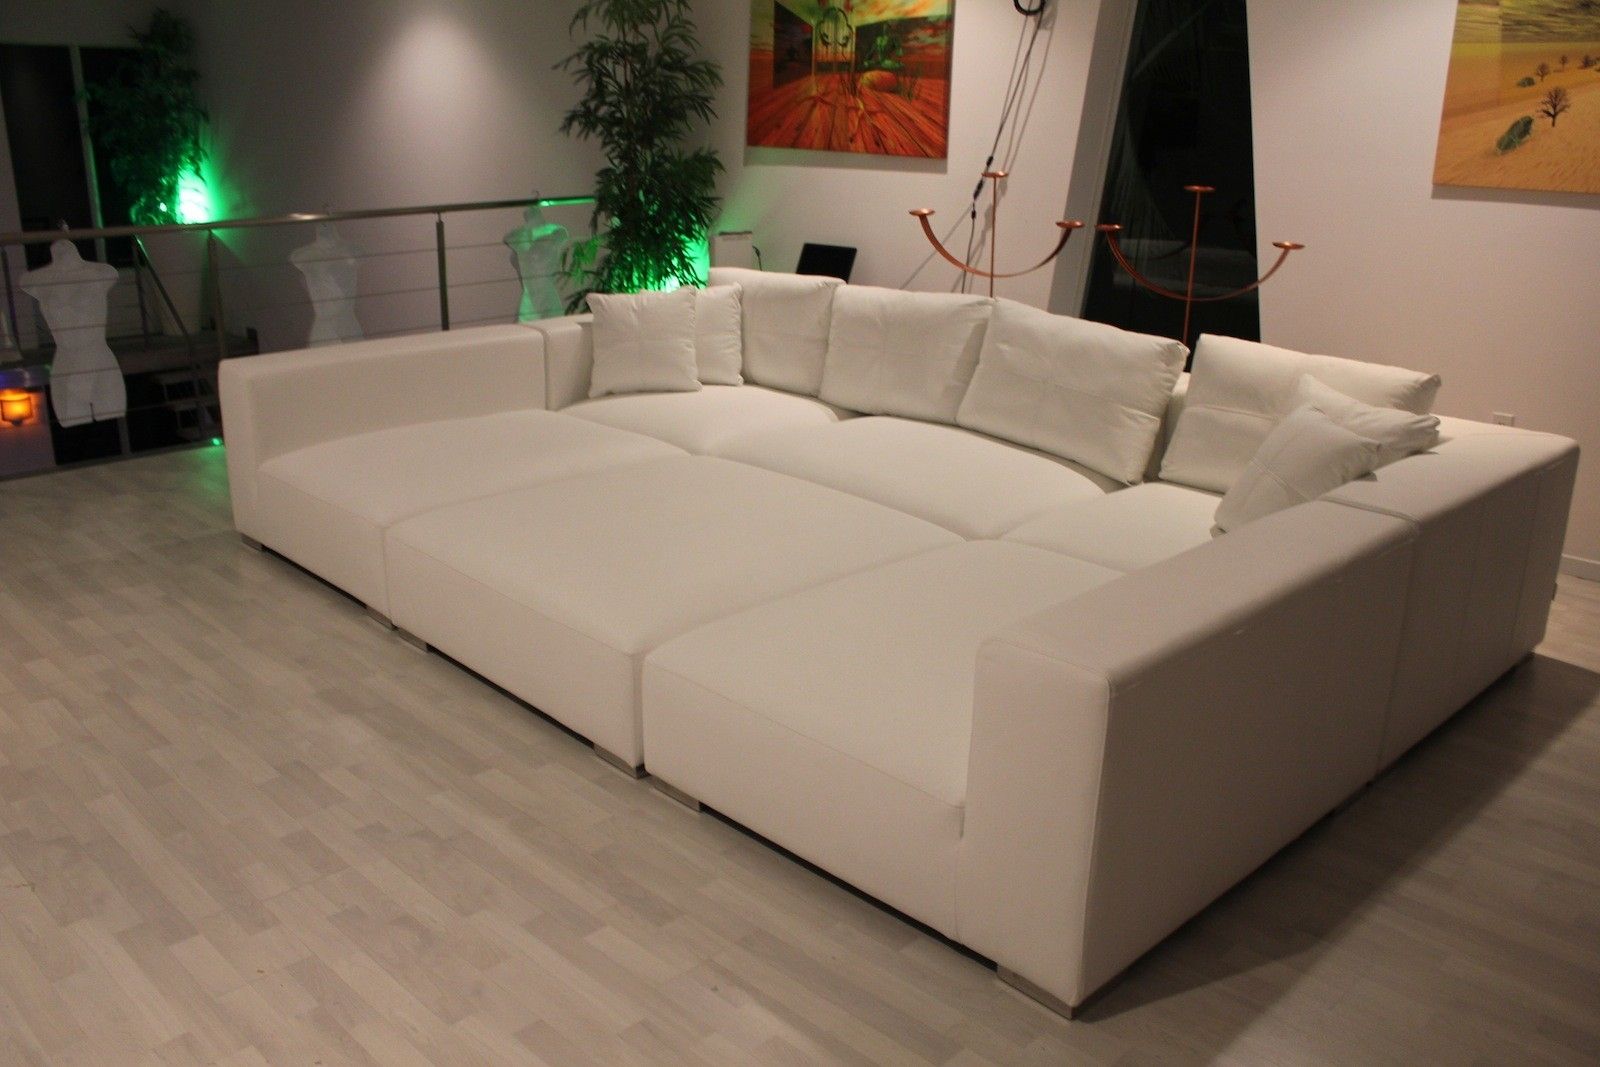 Amazing Pit Sectional Sofa 54 For Your Closeout Sectional Sofas Regarding Closeout Sectional Sofas 